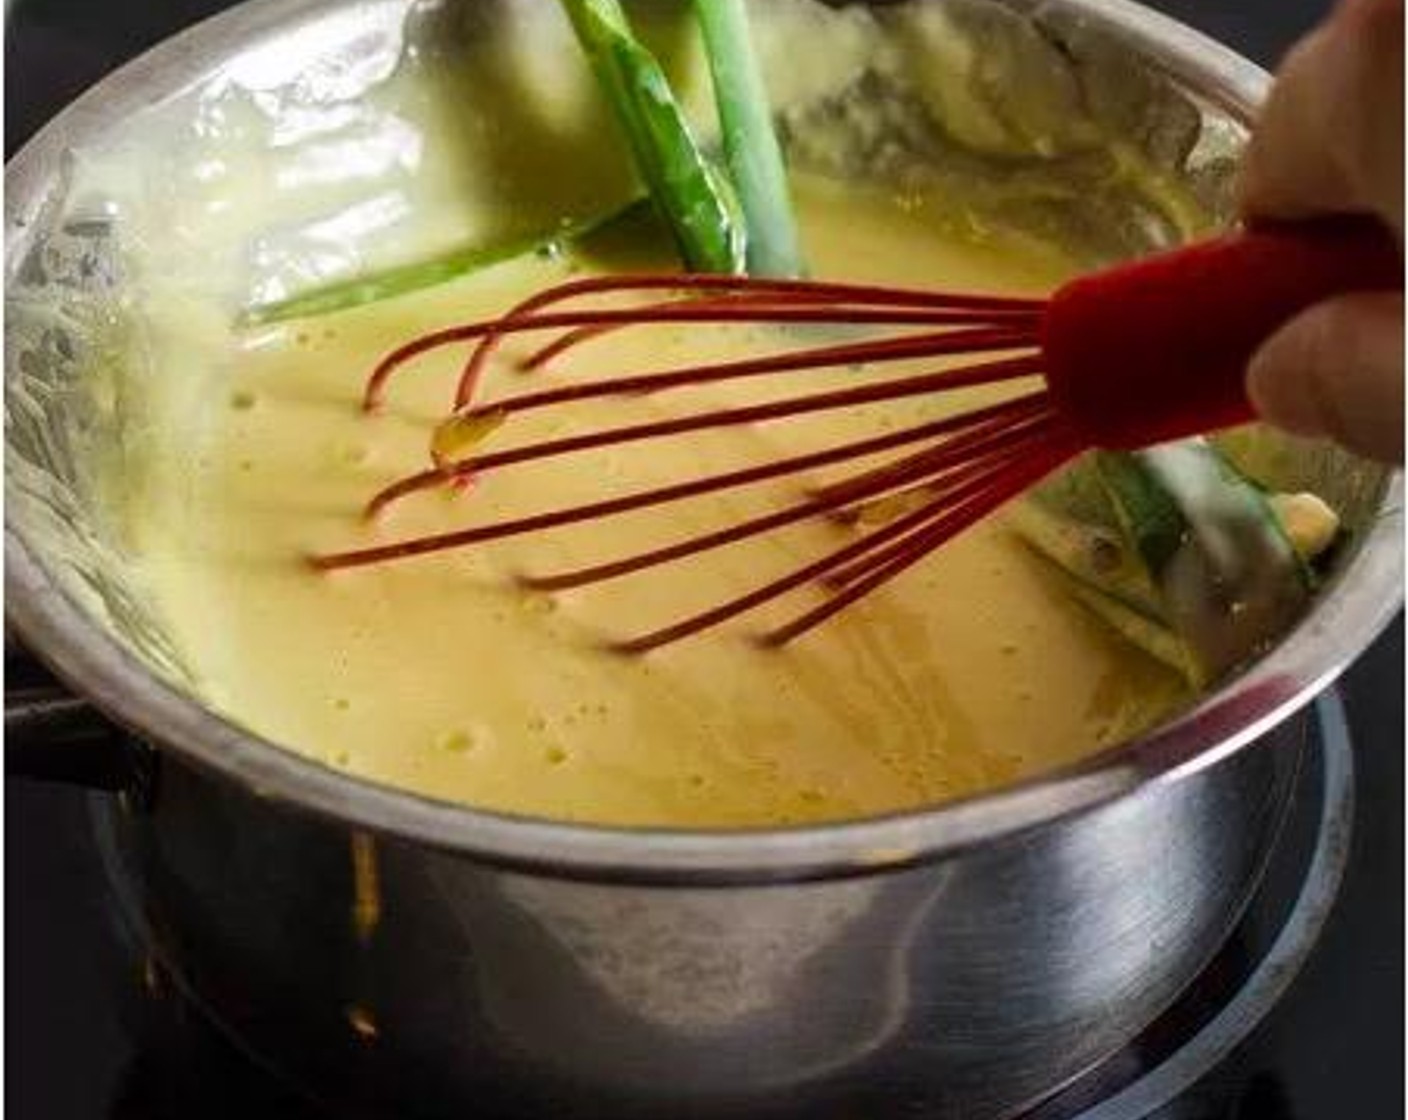 step 3 Fill a small saucepan with approximately 2 inches of water and bring it to a light boil over medium-high heat. Set the bowl with your kaya mixture over the saucepan. Whisk the kaya mixture frequently for 5 minutes.